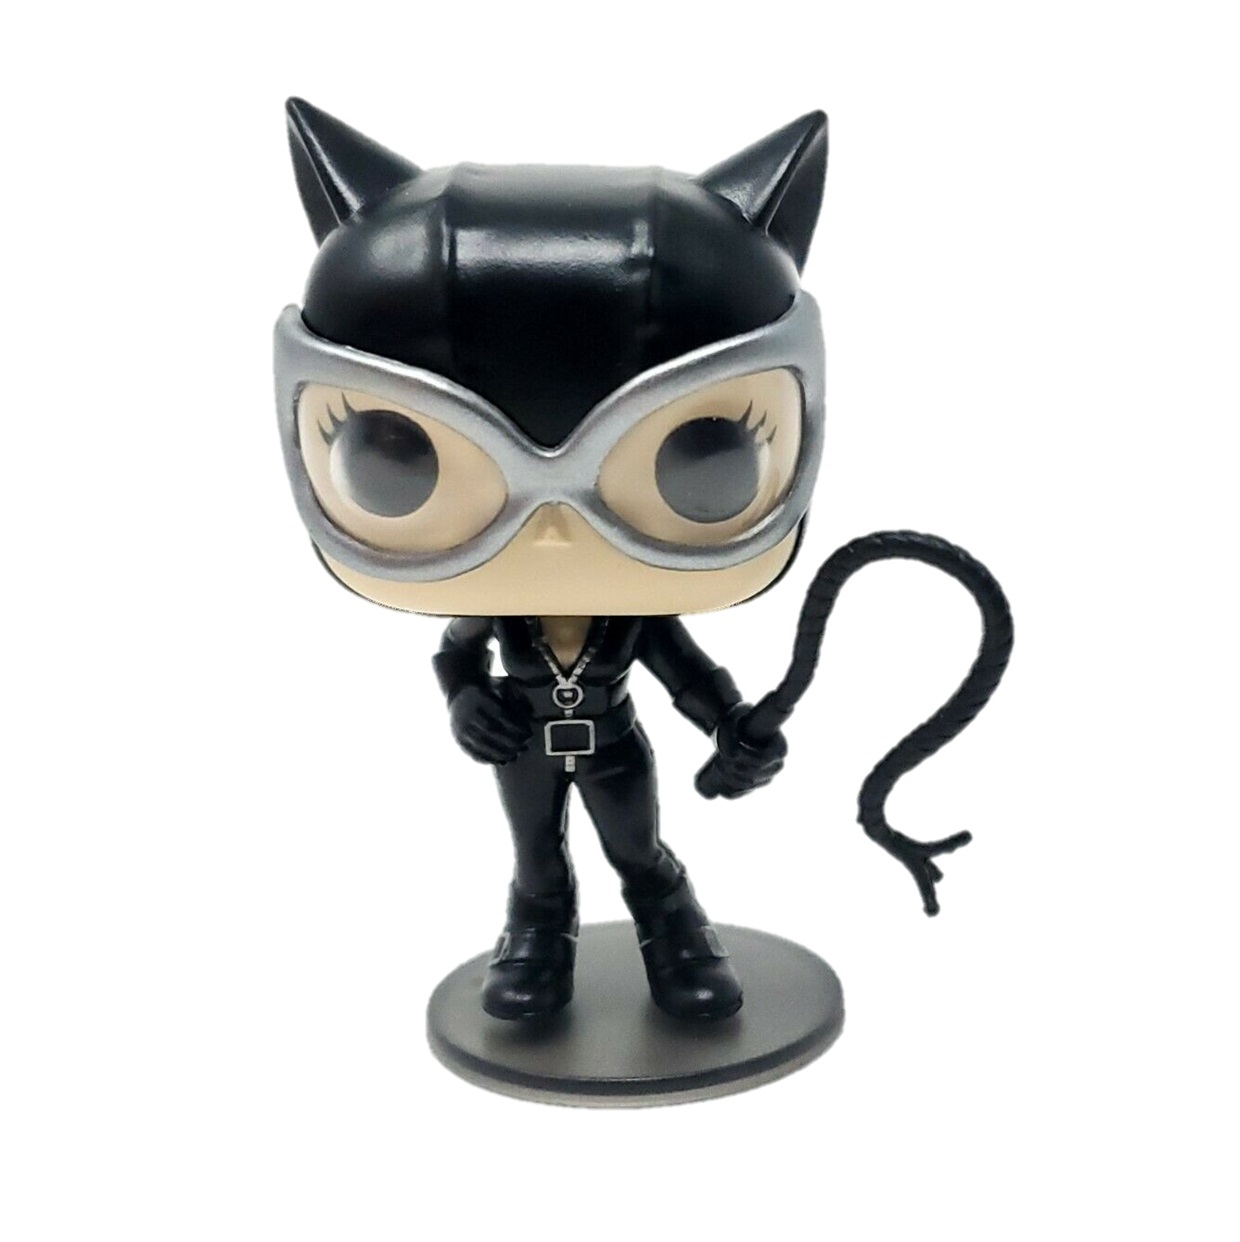 Catwoman + Robin #101 Pack Dc Pop! Funkoverse Strategy Game